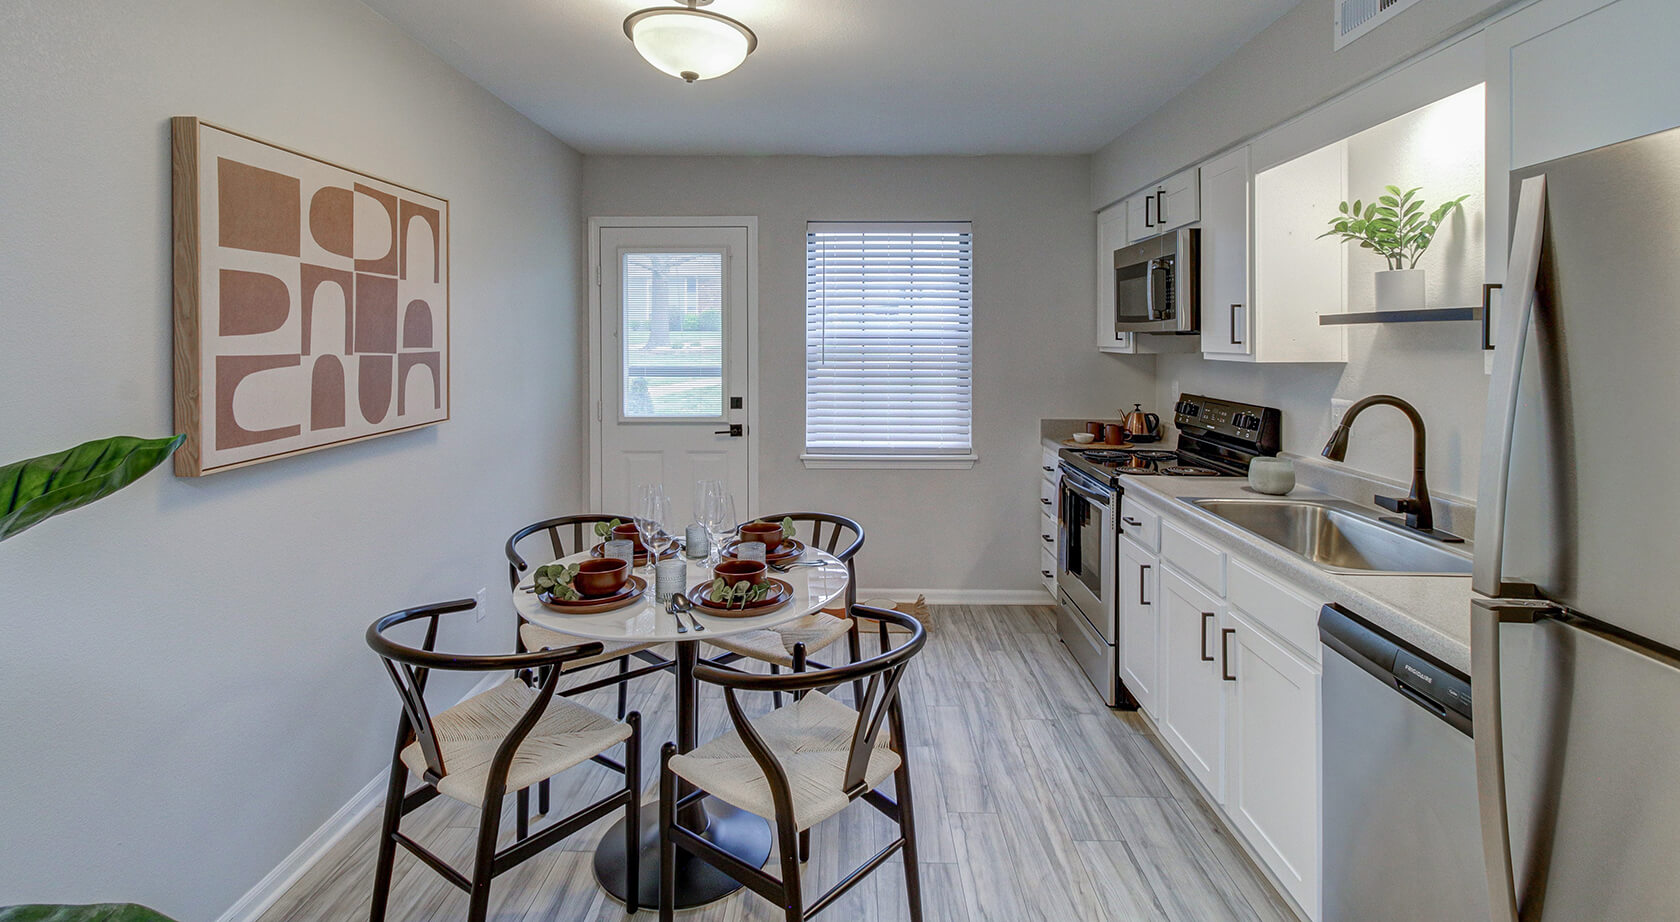 A kitchen with a table and chairs at The Arbor Apartments in Blue Springs, MO